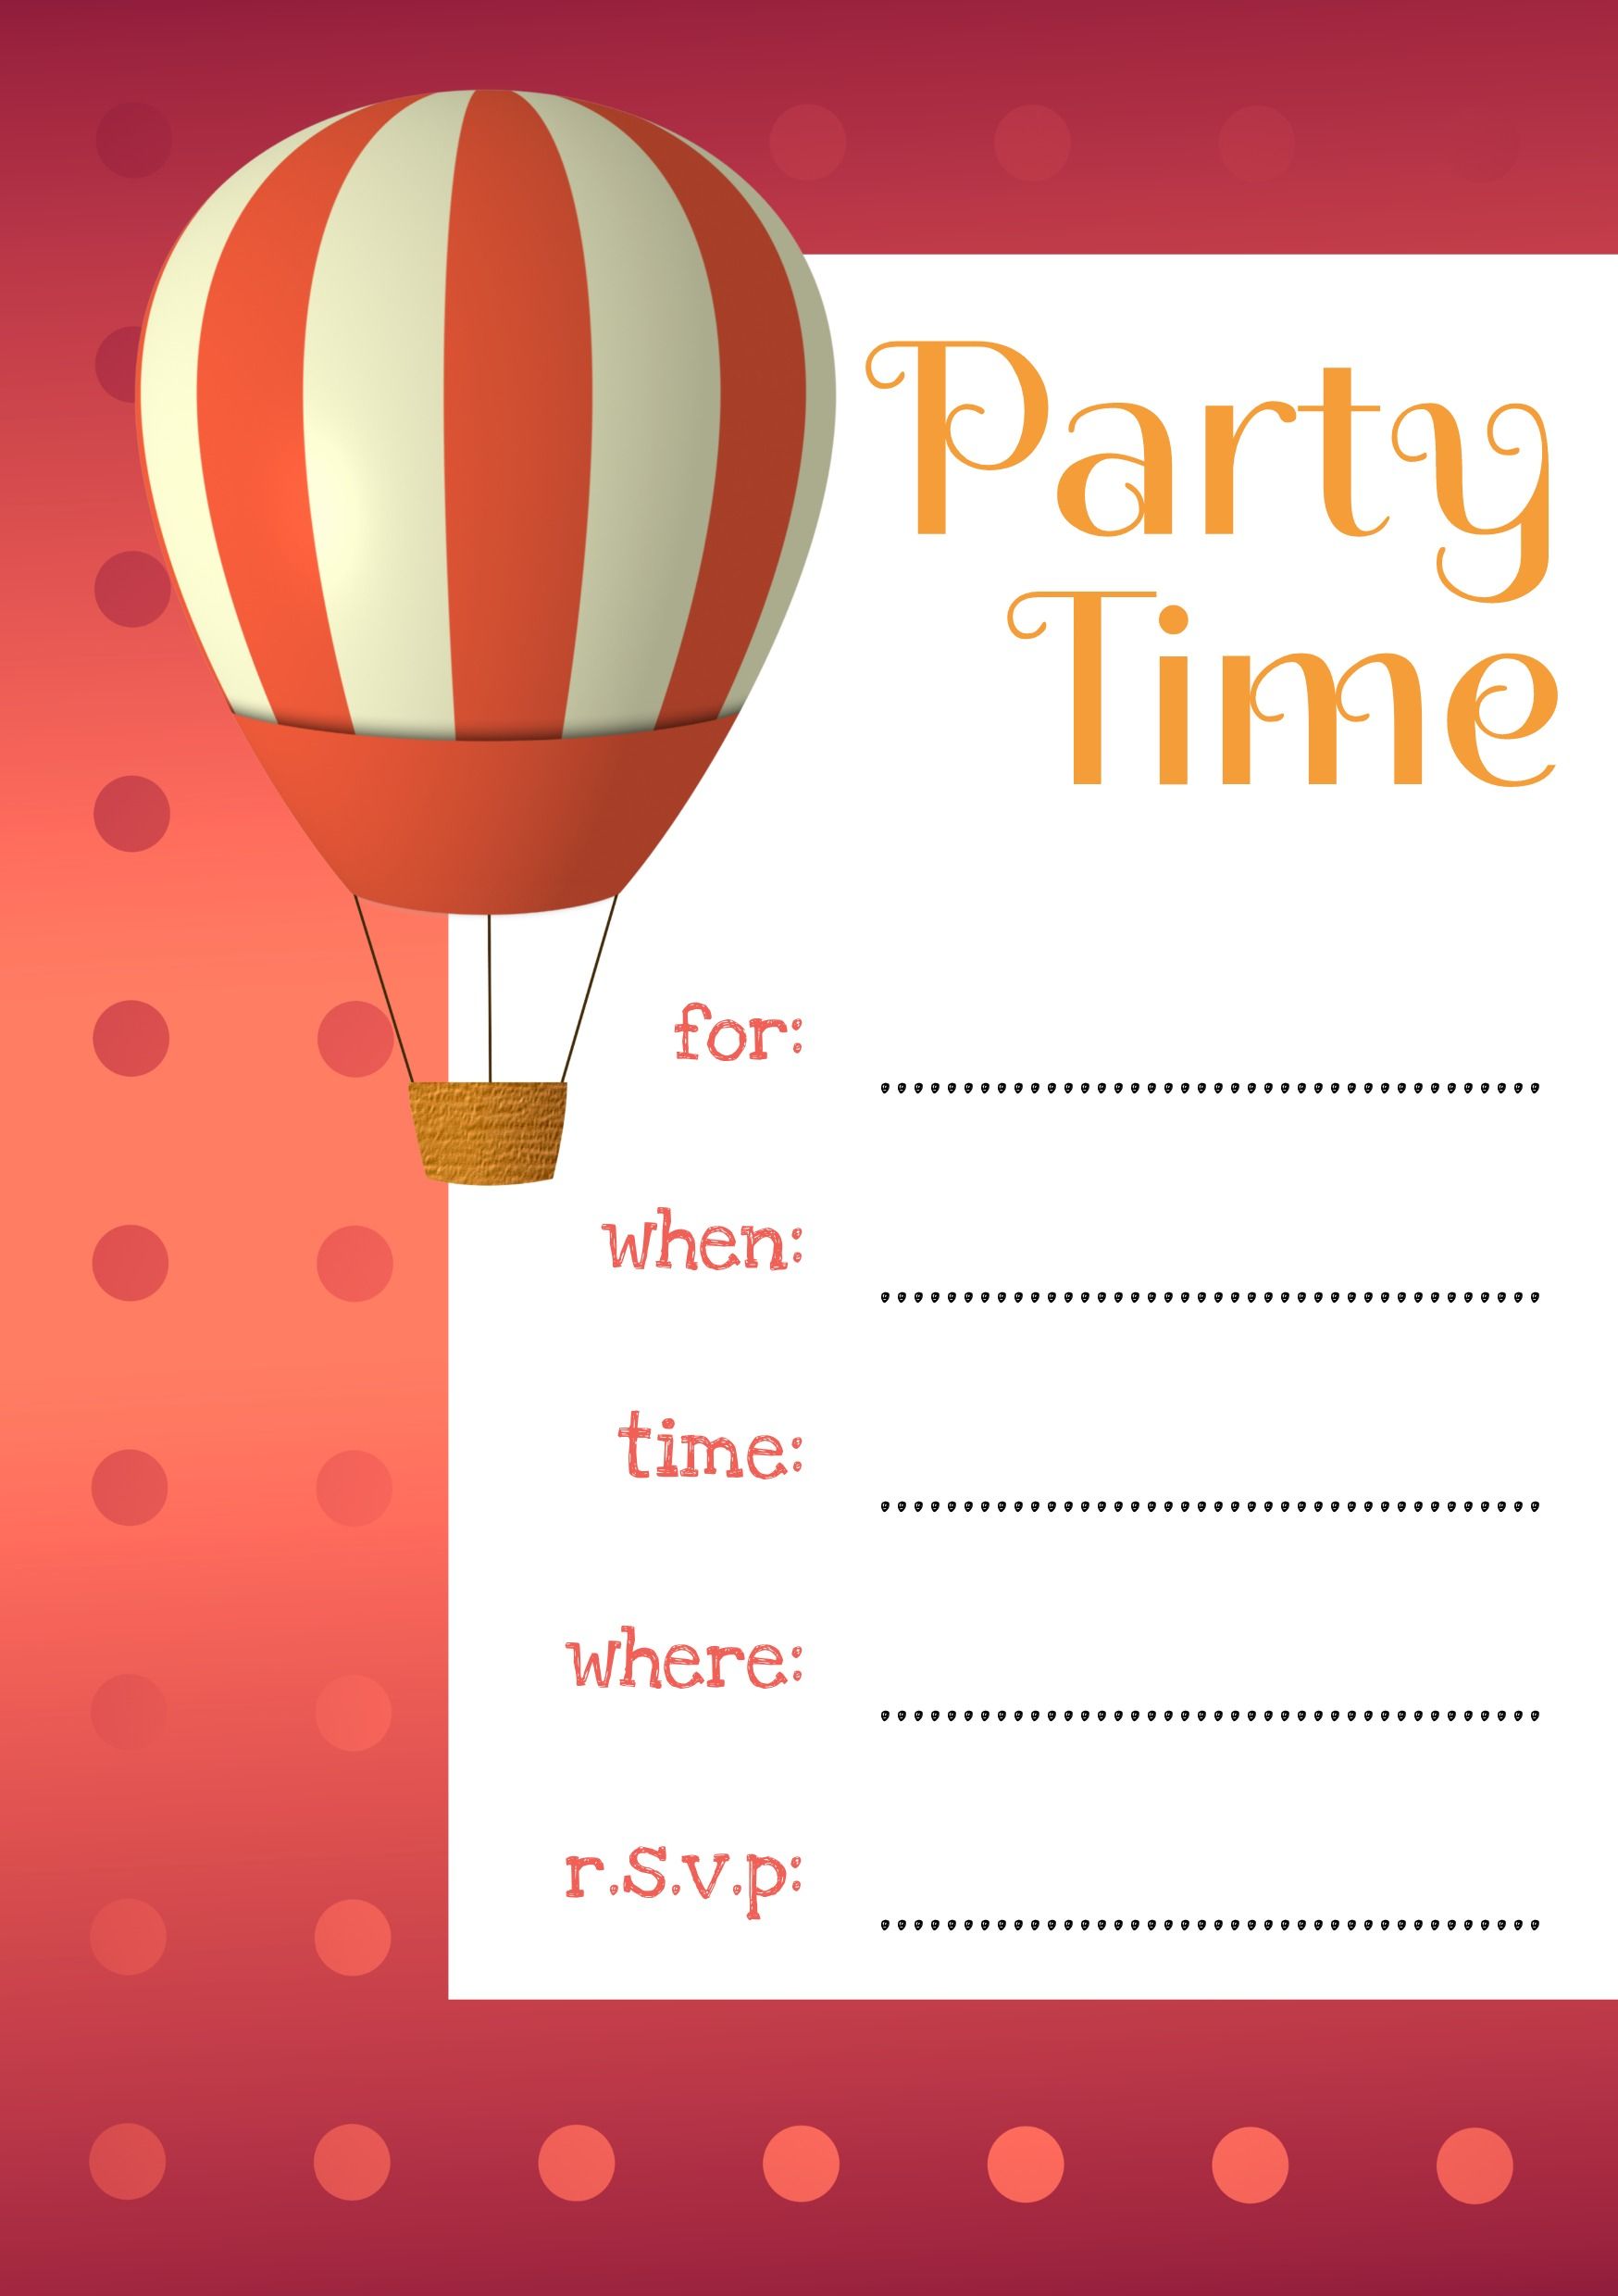 Party invitation template - How to design clever student council posters, 30 ideas to boost your creativity - Image